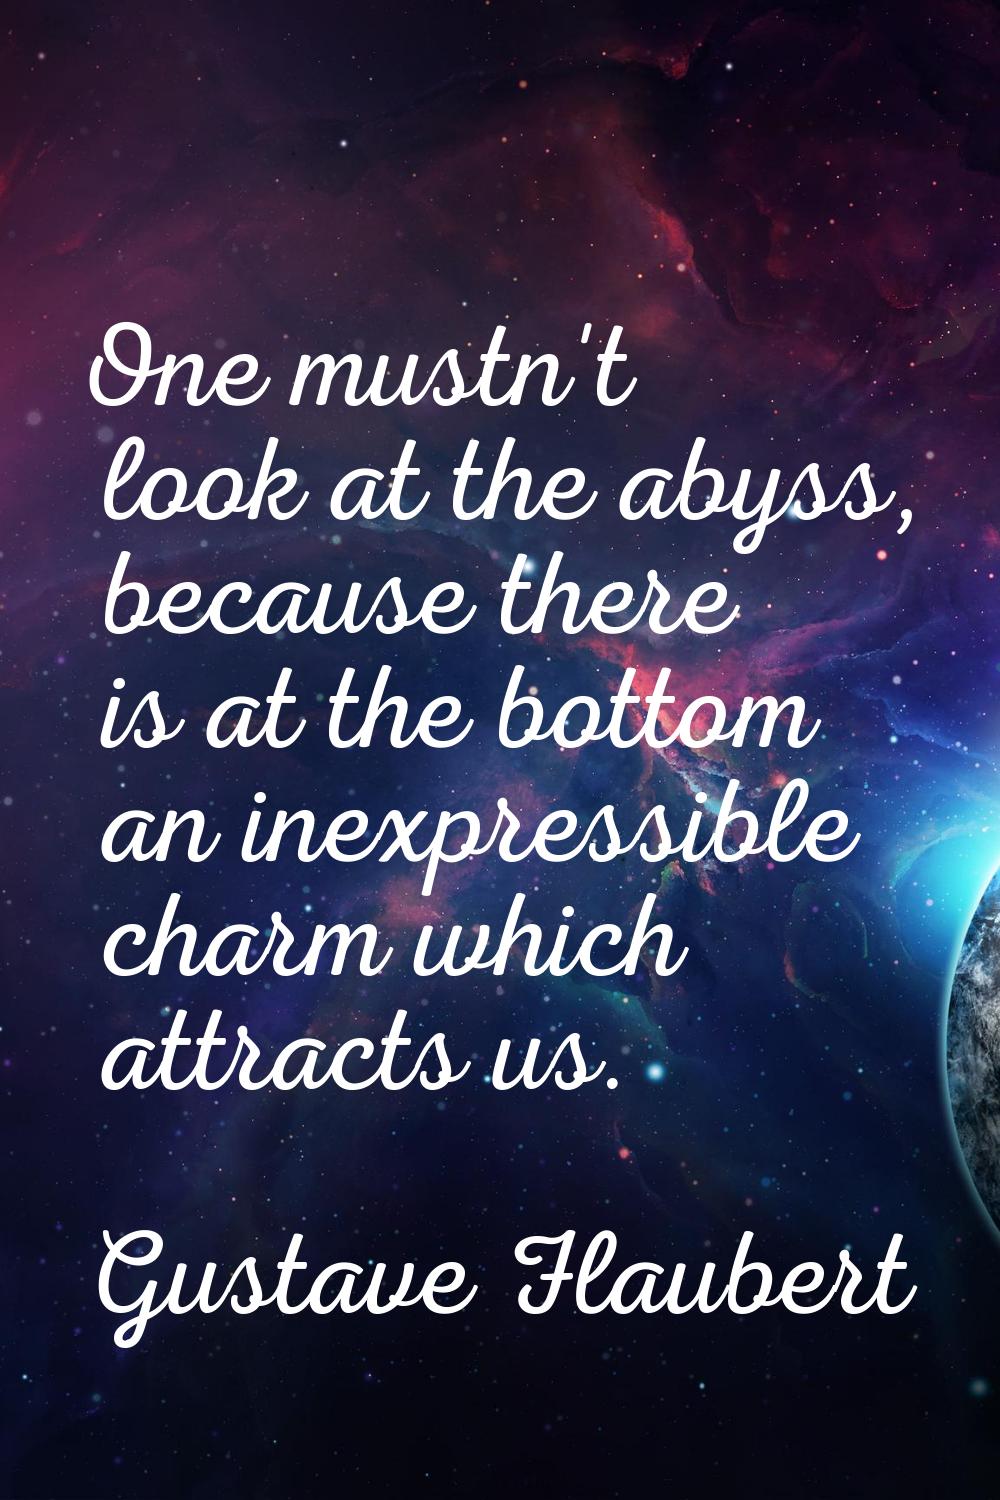 One mustn't look at the abyss, because there is at the bottom an inexpressible charm which attracts